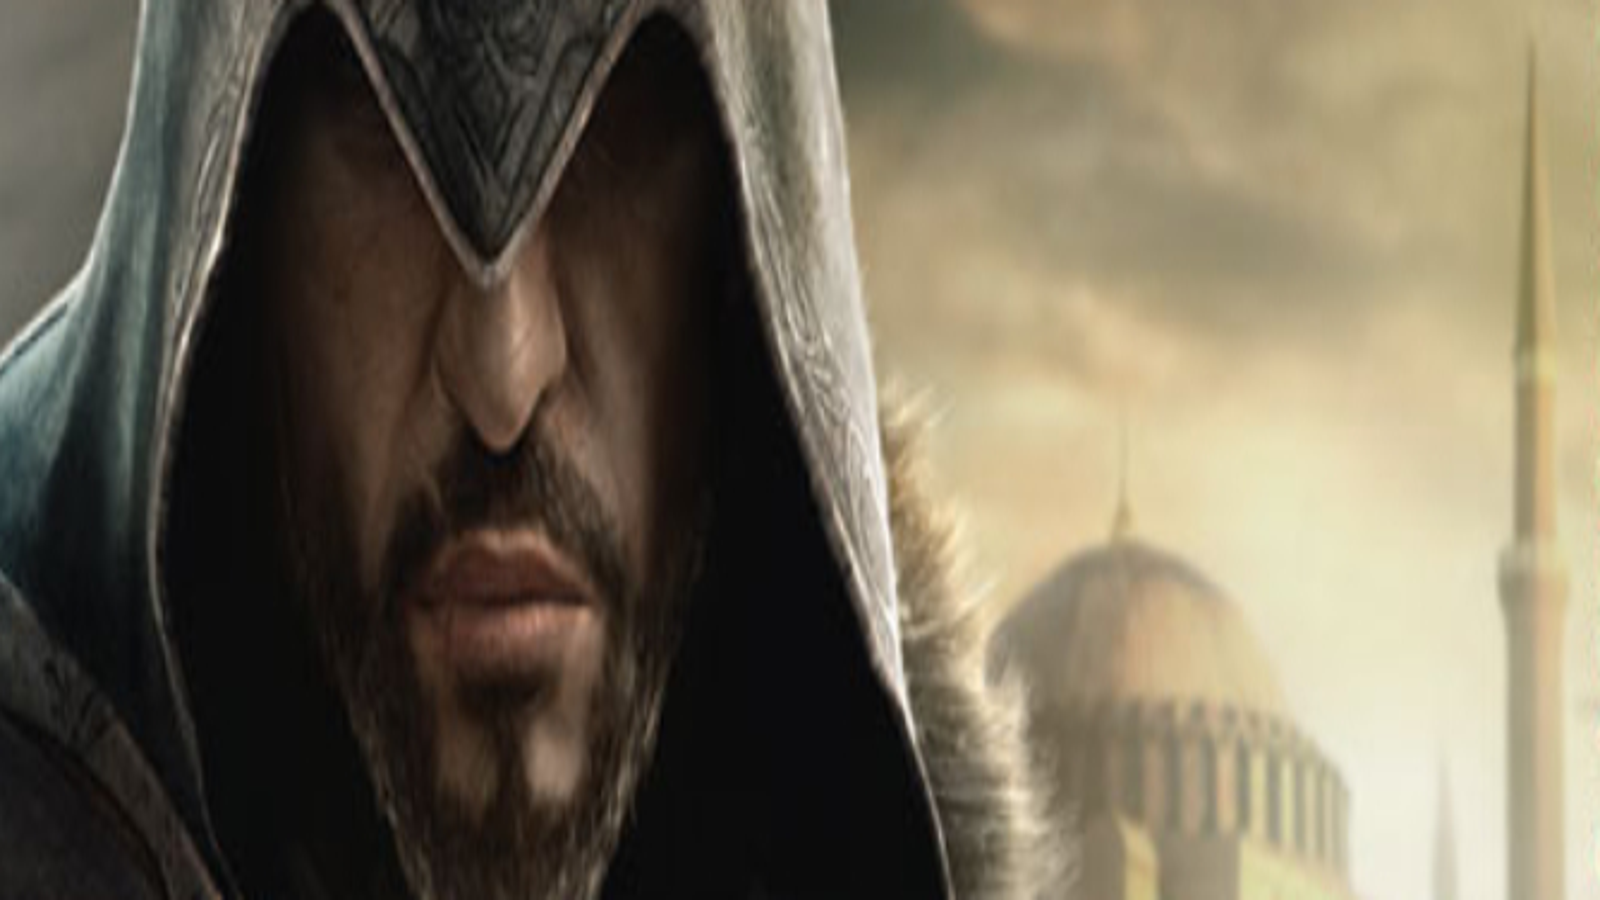 Fast Fingers achievement in Assassin's Creed: Revelations